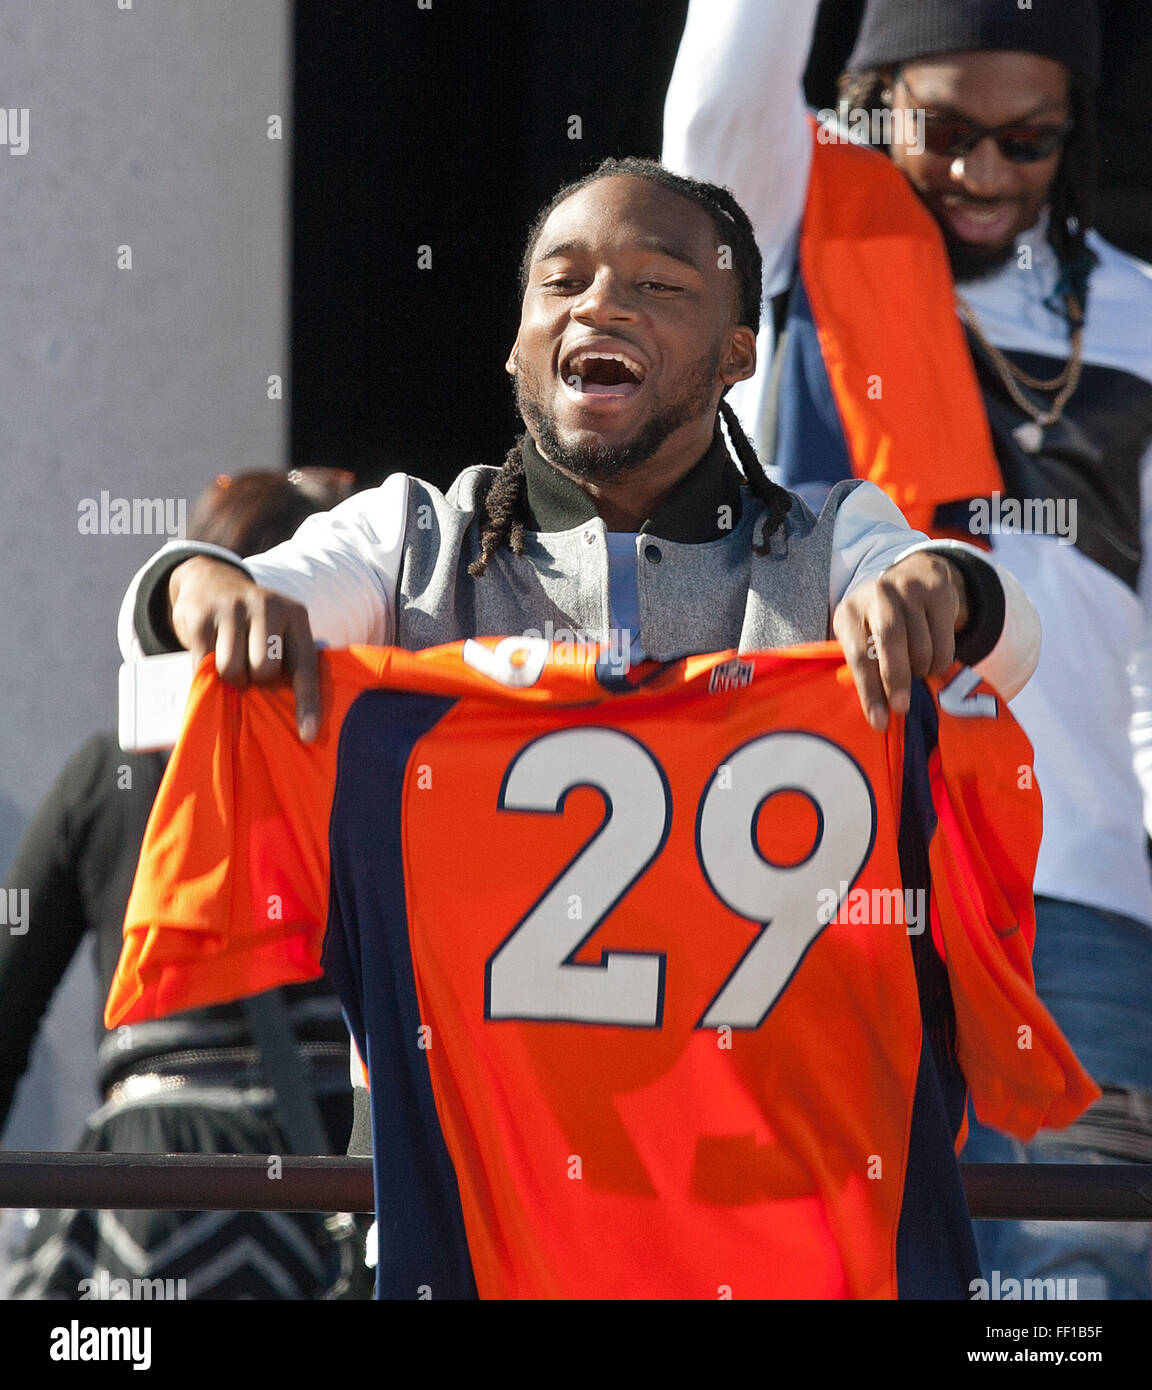 Denver, Colorado, USA. 9th Feb, 2016. Broncos BRADLEY ROBY celebrates with team mates during the Super Bowl victory celebration at the Denver City & County Building in downtown Denver Tuesday afternoon. © Hector Acevedo/ZUMA Wire/Alamy Live News Stock Photo